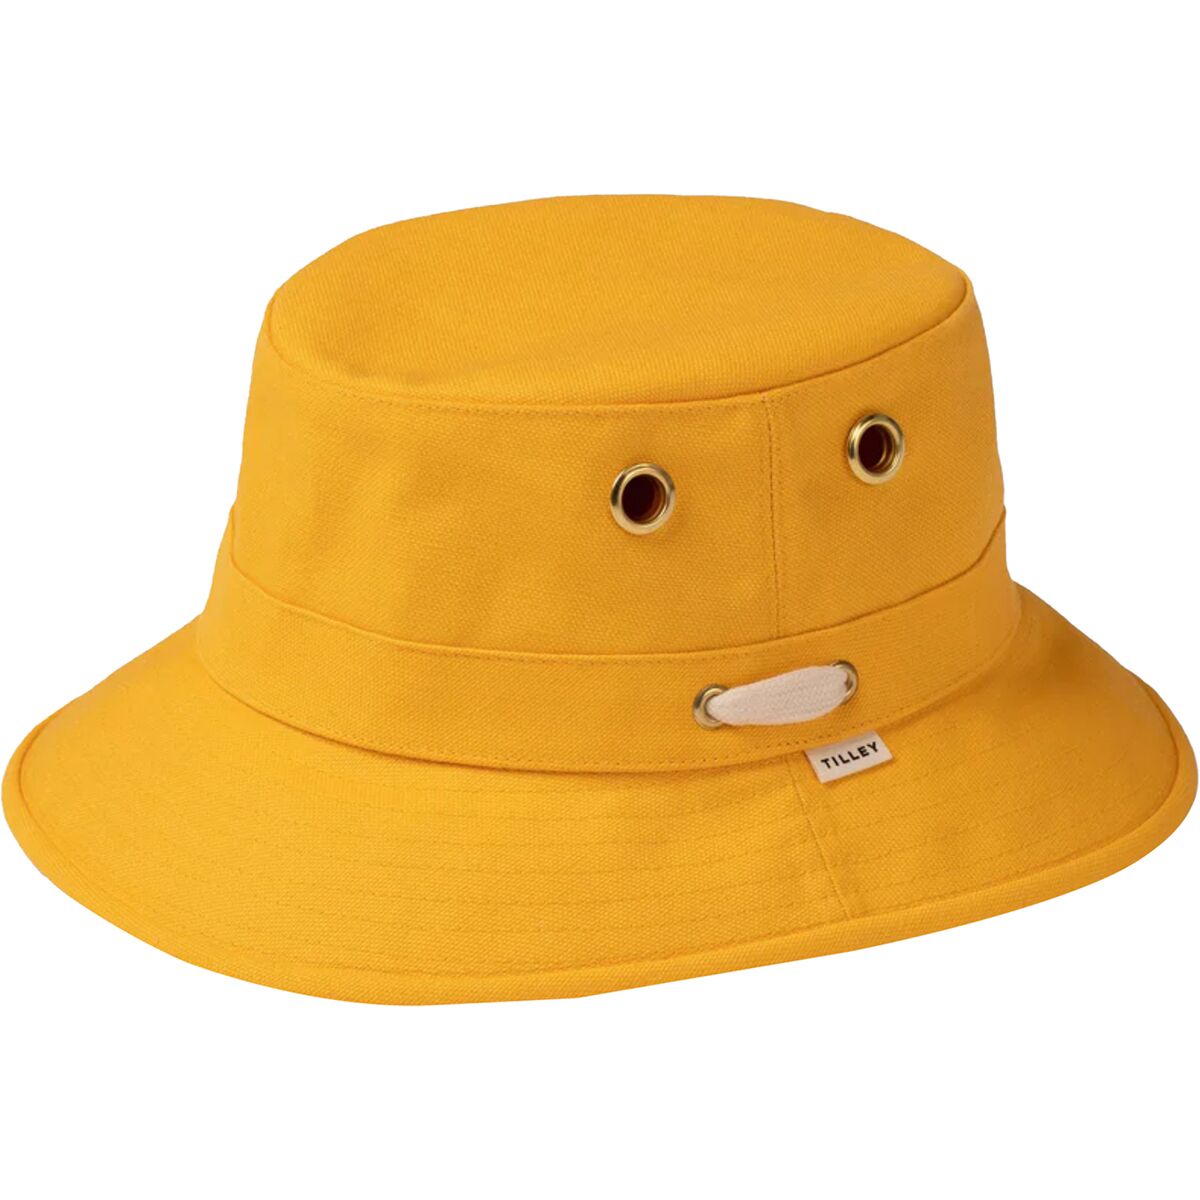 Tilley The Iconic T1 Bucket Hat - Men